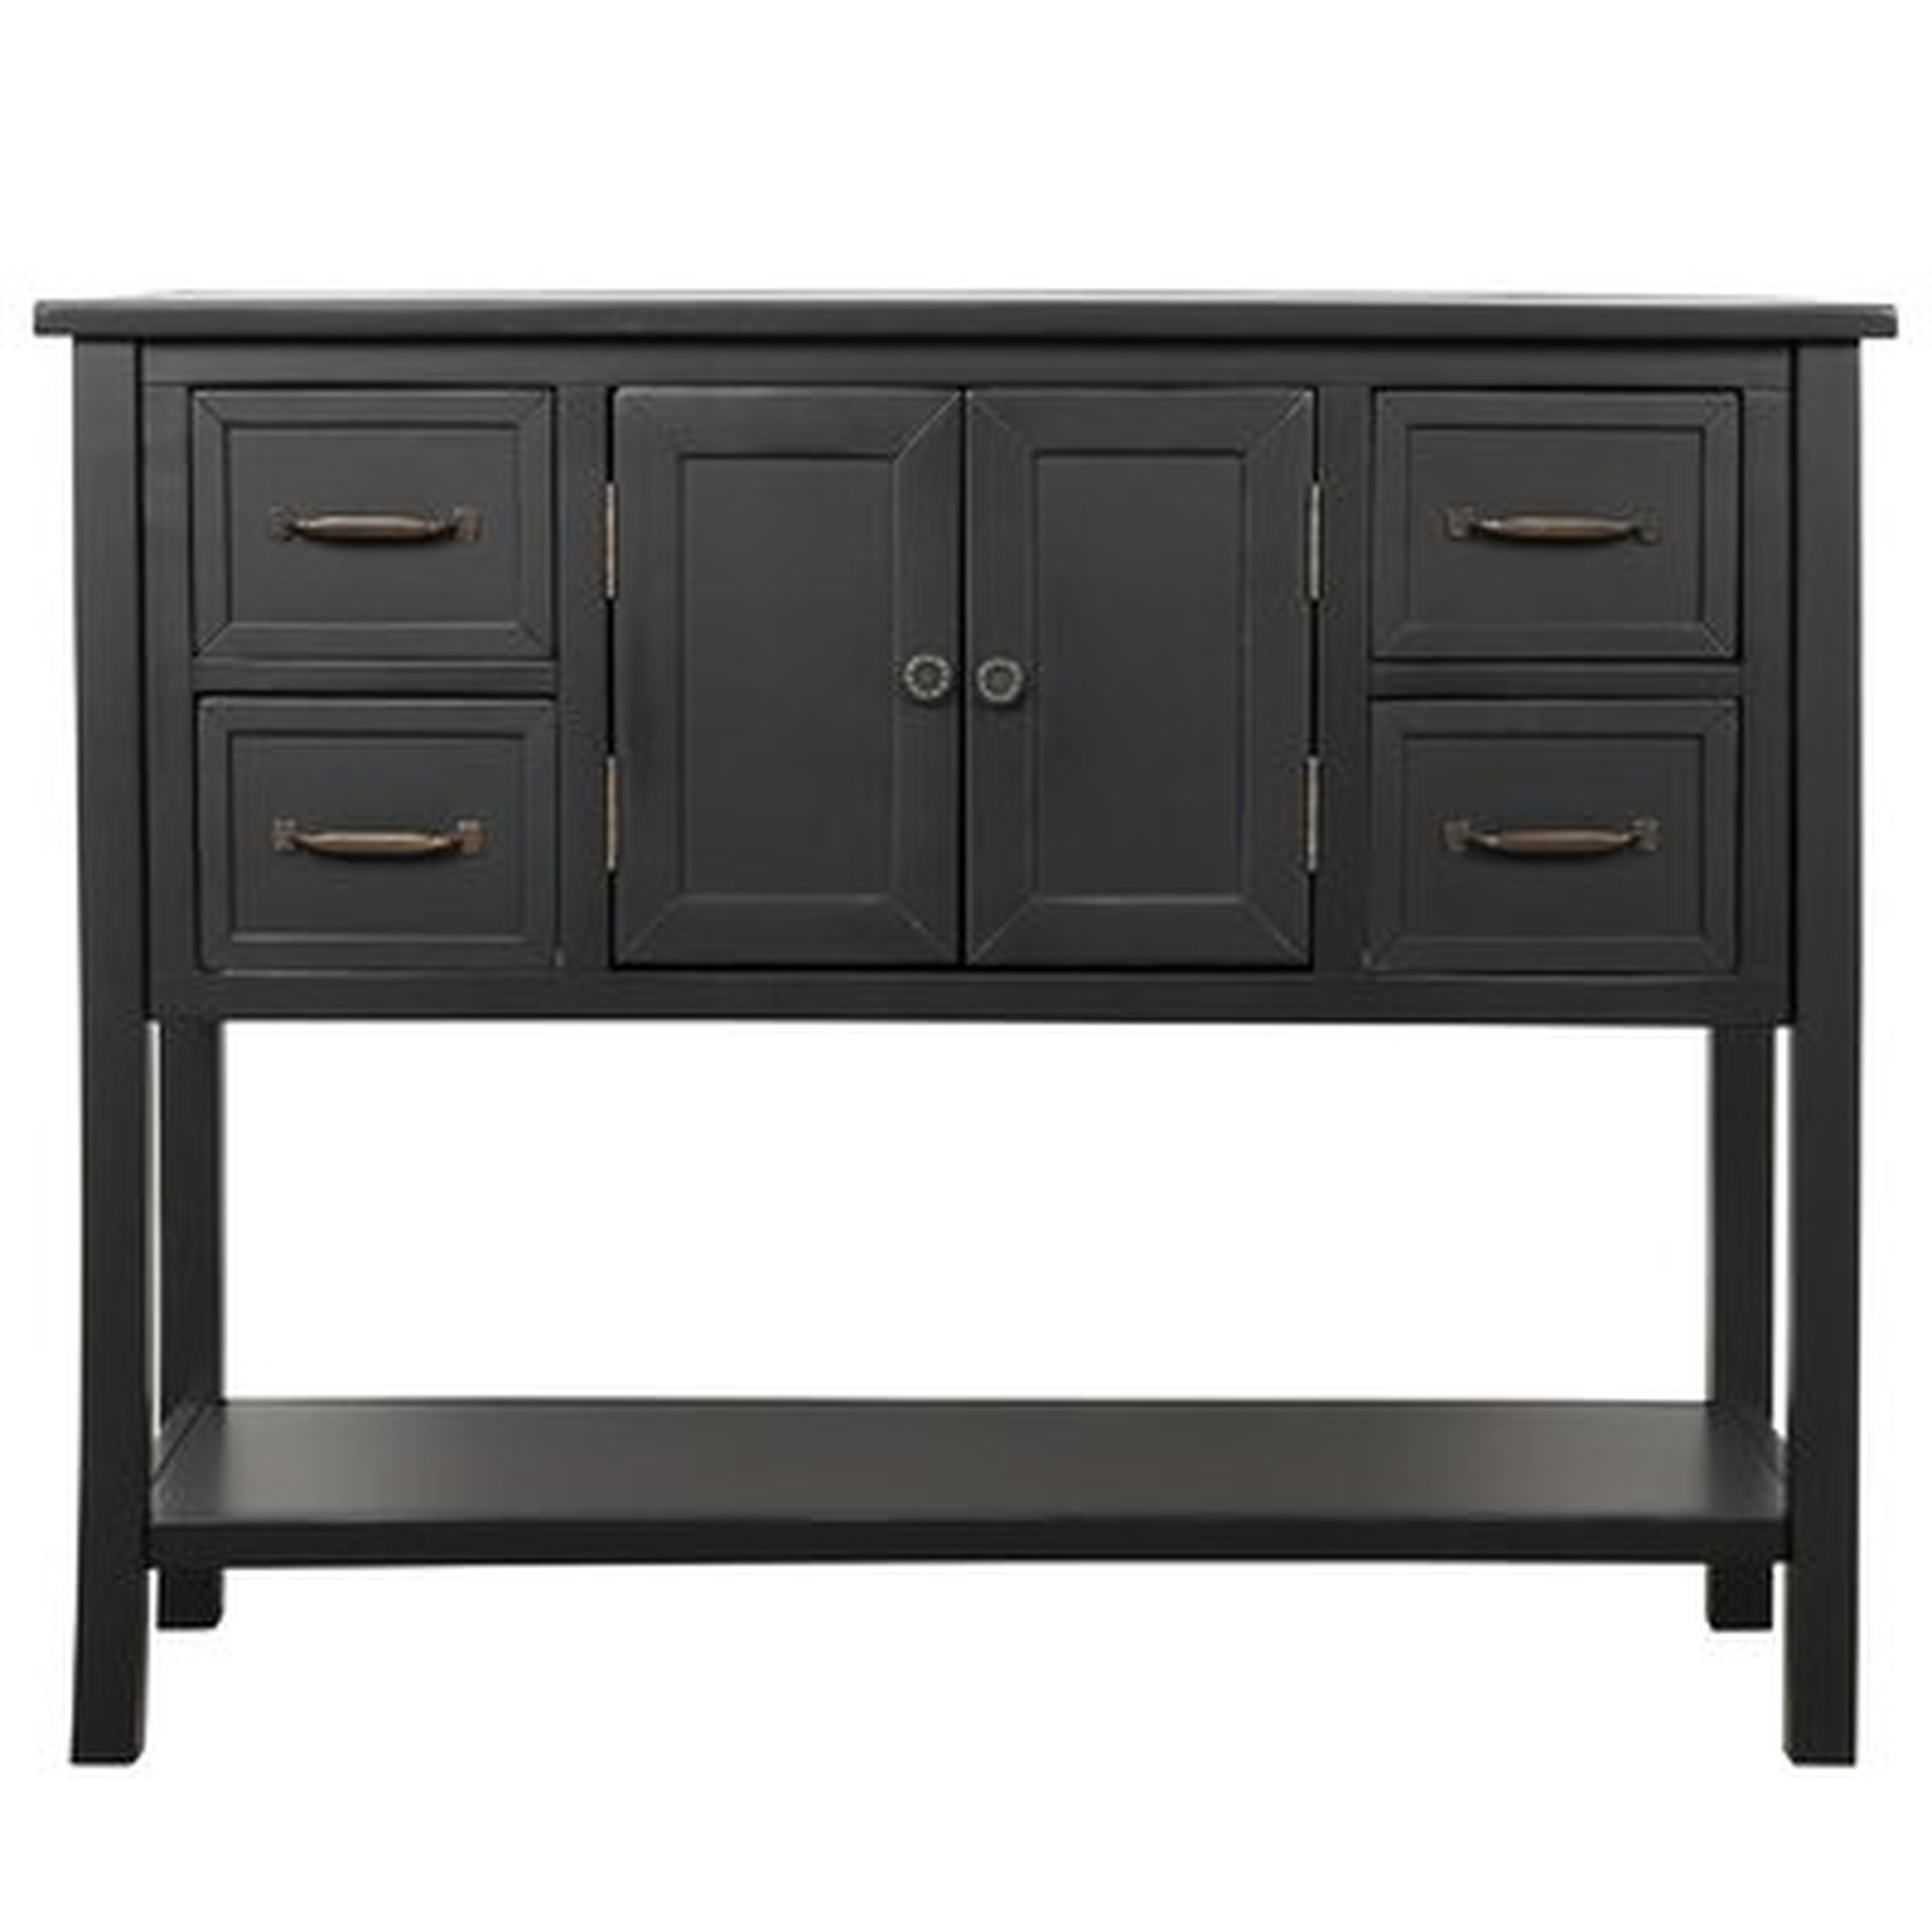 Console Table With 4 Drawers, 1 Cabinet And 1 Shelf - Wayfair